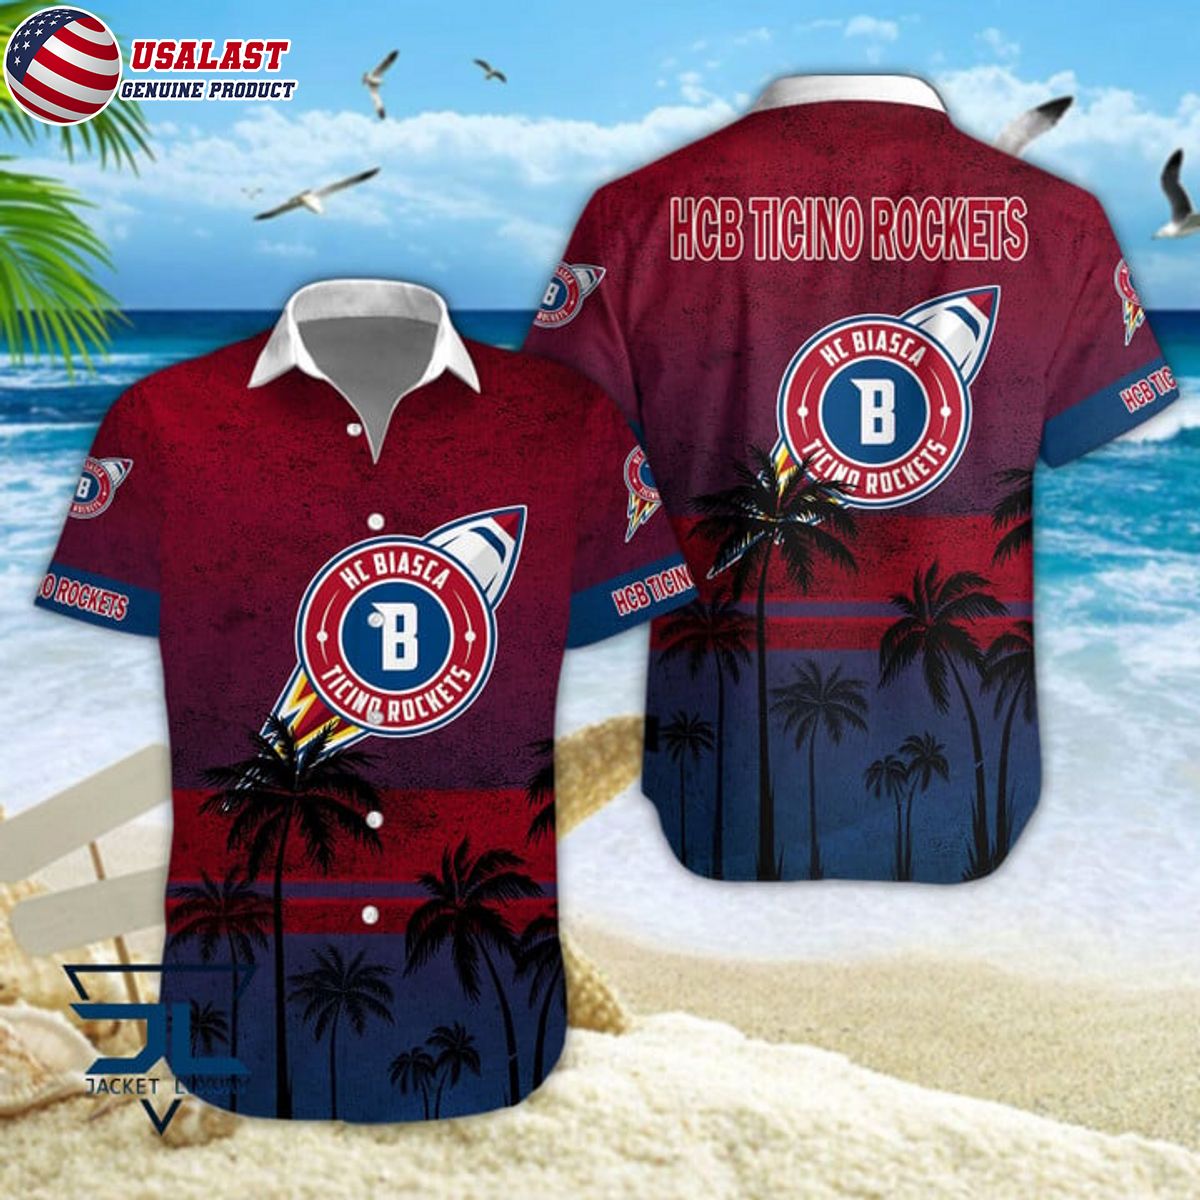 HCB Ticino Rockets National League Coconut Tree Hawaiian Shirt

Welcome to this vibrant blog section, where we dive into the world of fashion and hockey with a twist!

https://t.co/zXTNLWGebe https://t.co/gkPVrYgc6t